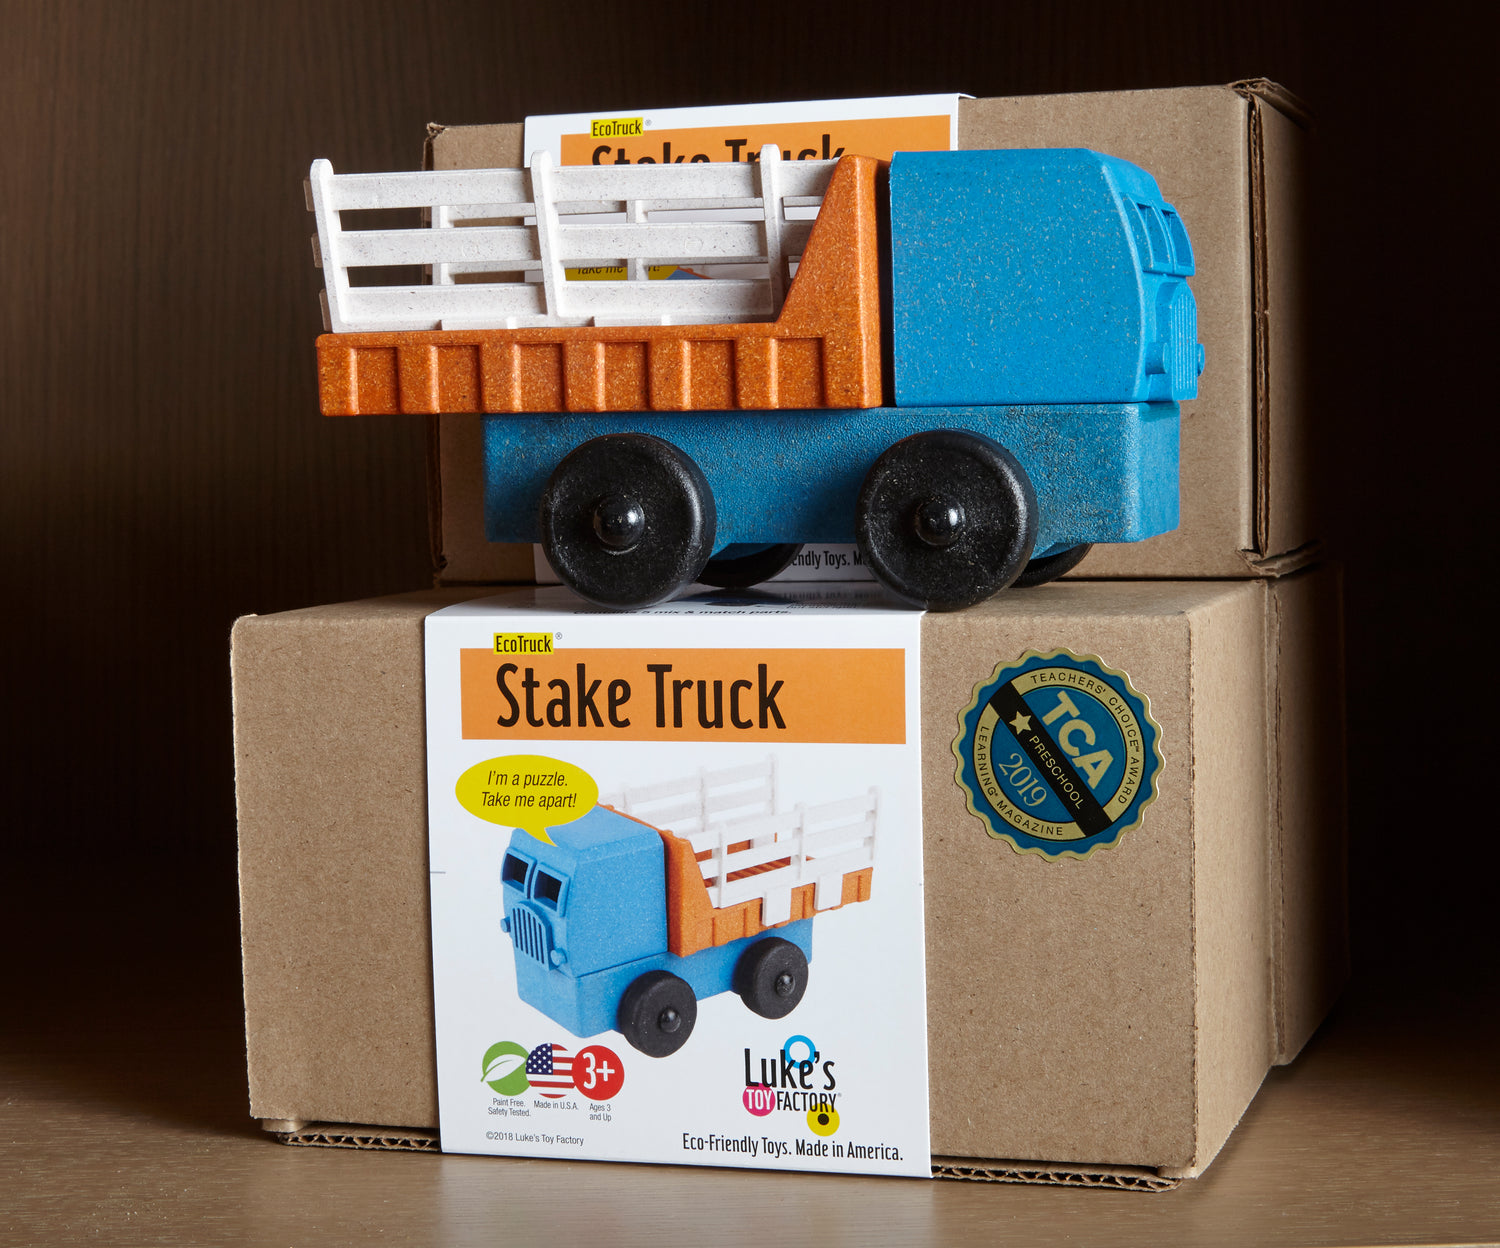 A preschool toy Stake Truck sits on its cardboard box packaging on a store shelf